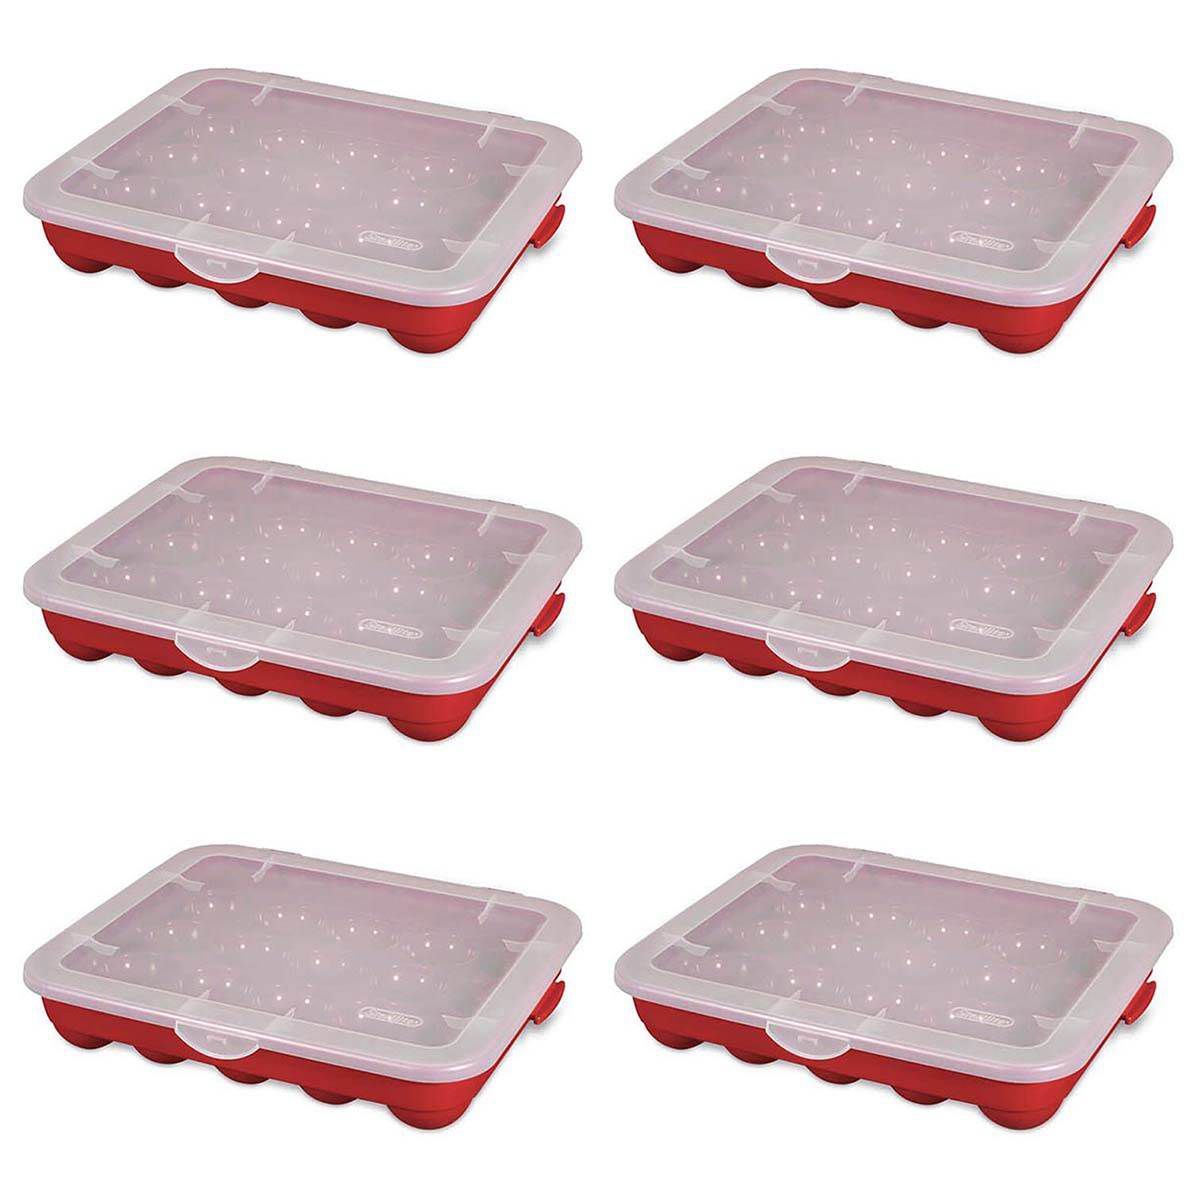 Sterilite 20 Compartment Christmas Holiday Ornament Box Storage Case (6 Pack) | Target